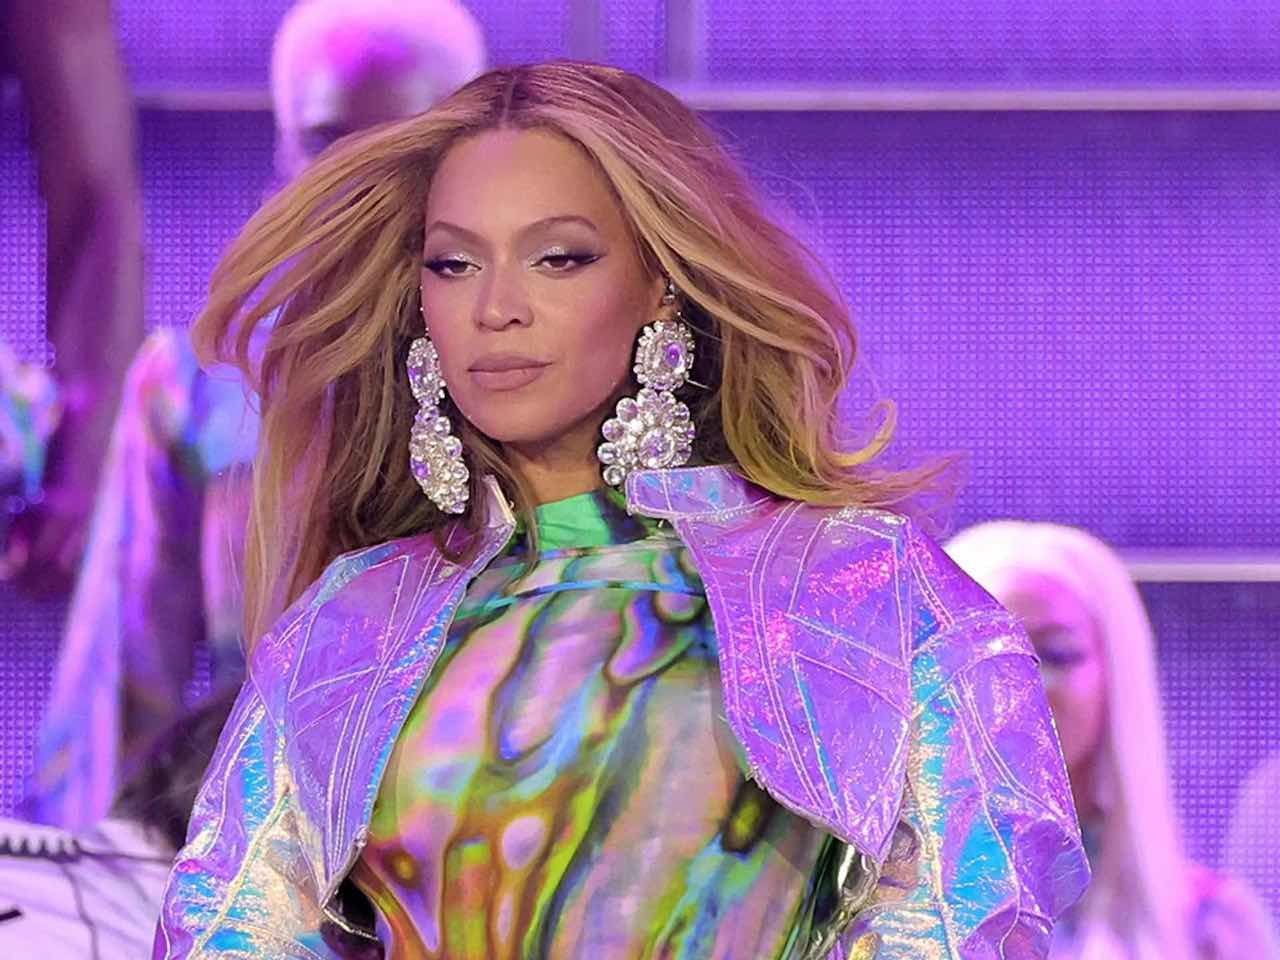 Spilling the tea on Beyoncé's Chicago real estate rumblings, this deep dive explores if the Windy City may influence Queen Bey's net worth. Read about her potential mansion mastery!